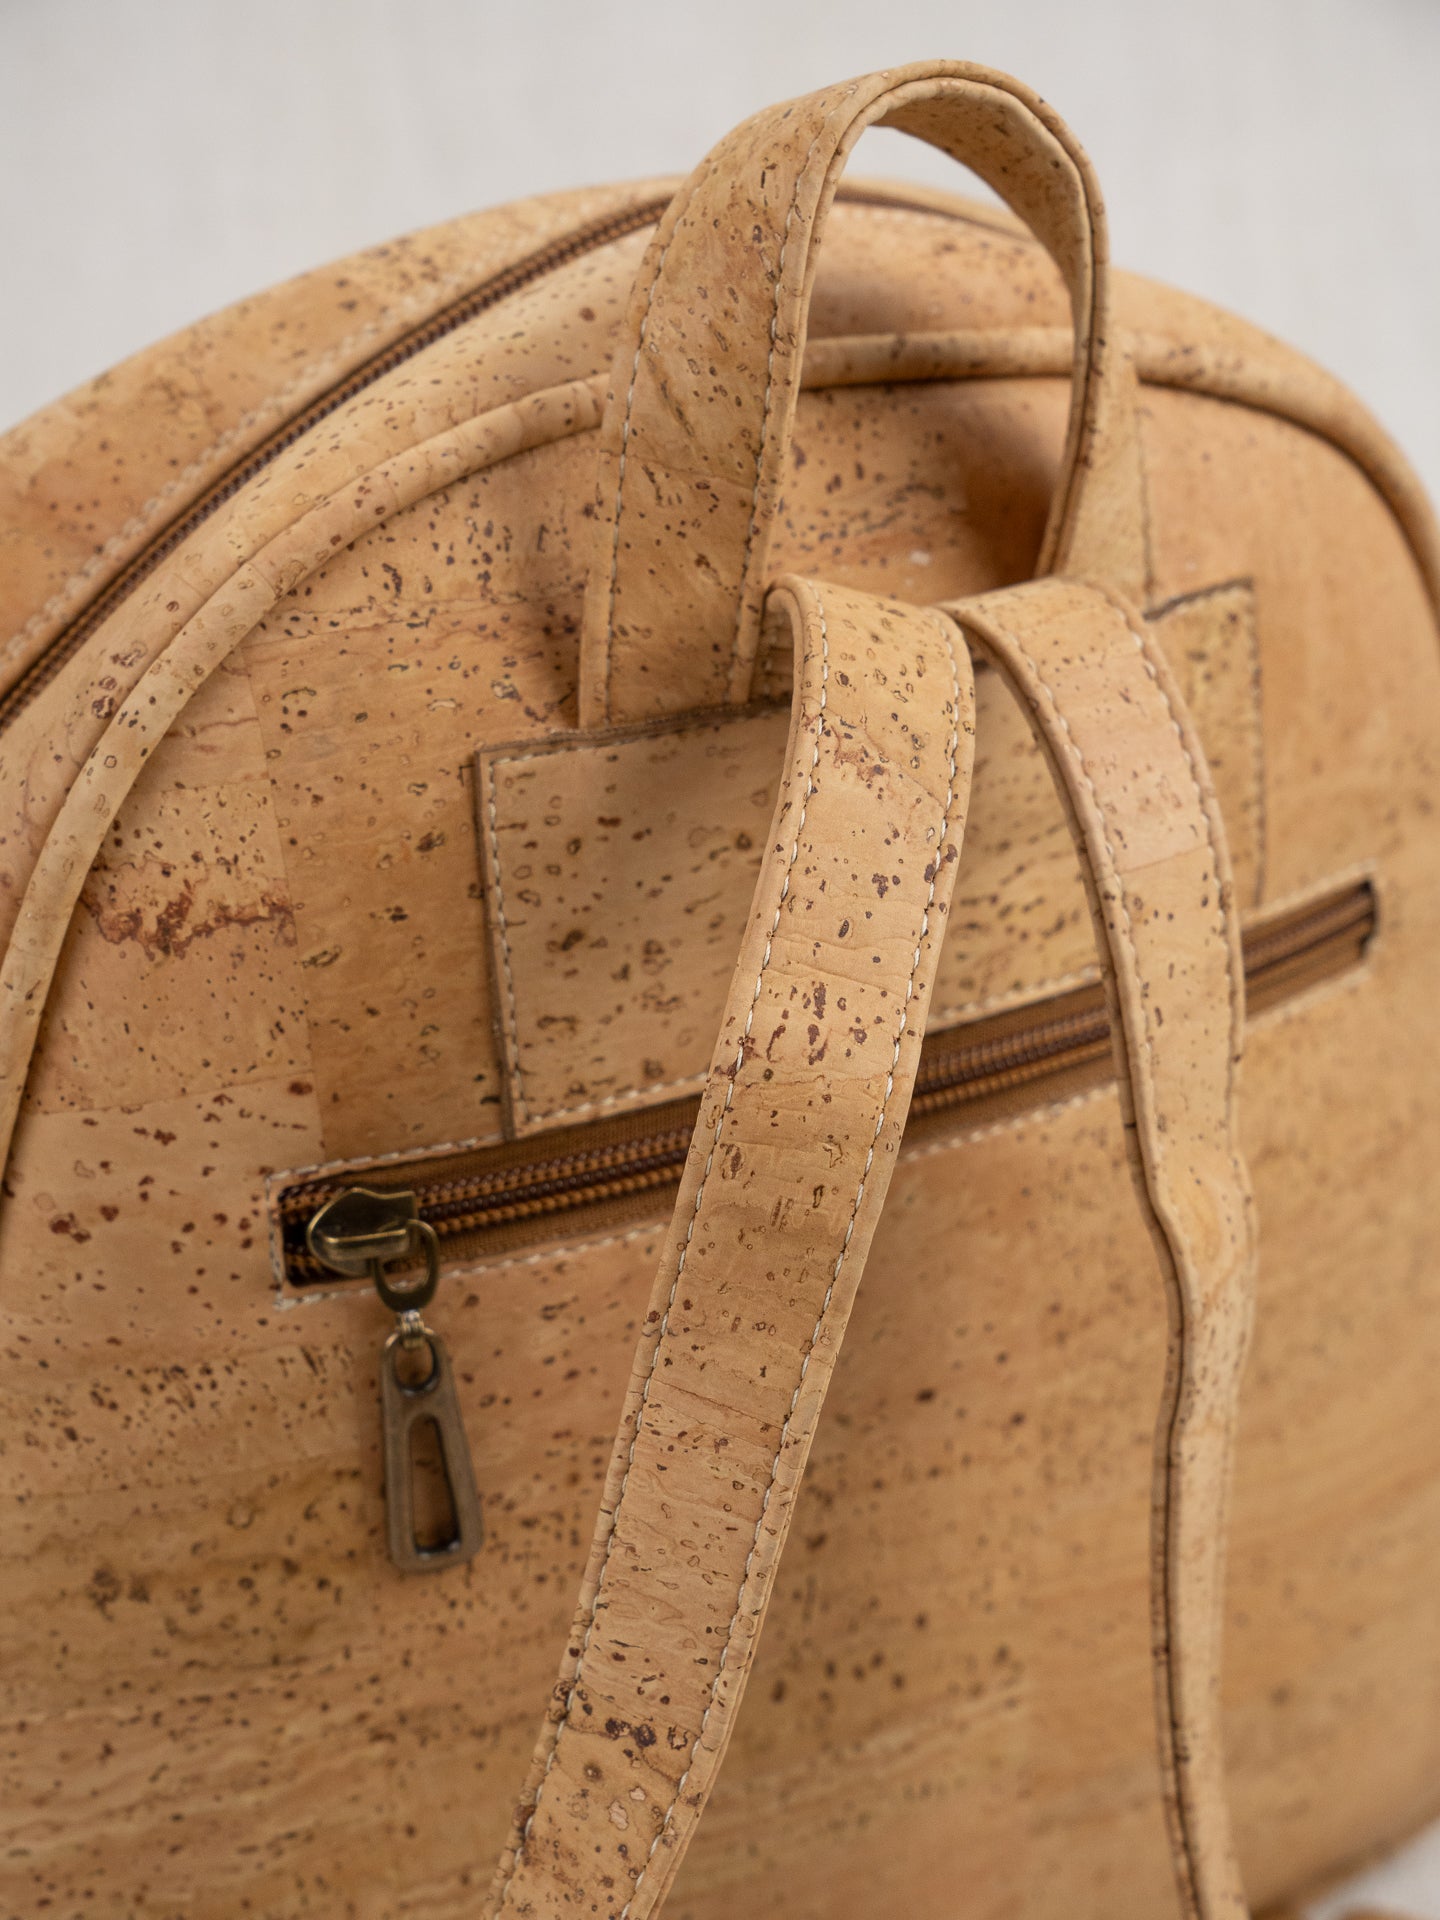 Brentwood Collection Backpack